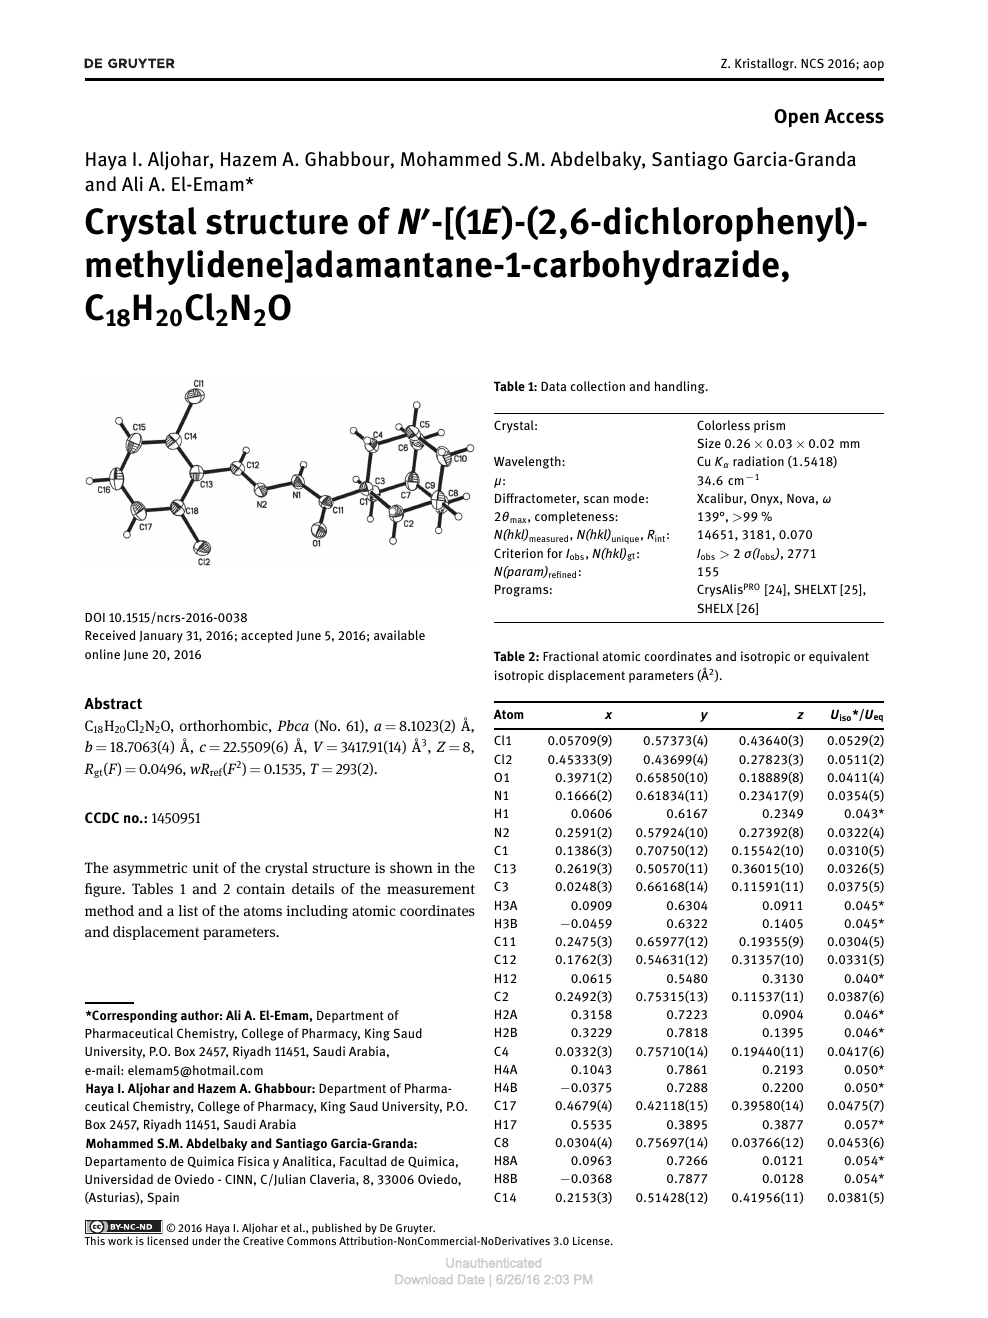 Crystal Structure Of N 1e 2 6 Dichlorophenyl Methylidene Adamantane 1 Carbohydrazide C18hcl2n2o Topic Of Research Paper In Chemical Sciences Download Scholarly Article Pdf And Read For Free On Cyberleninka Open Science Hub